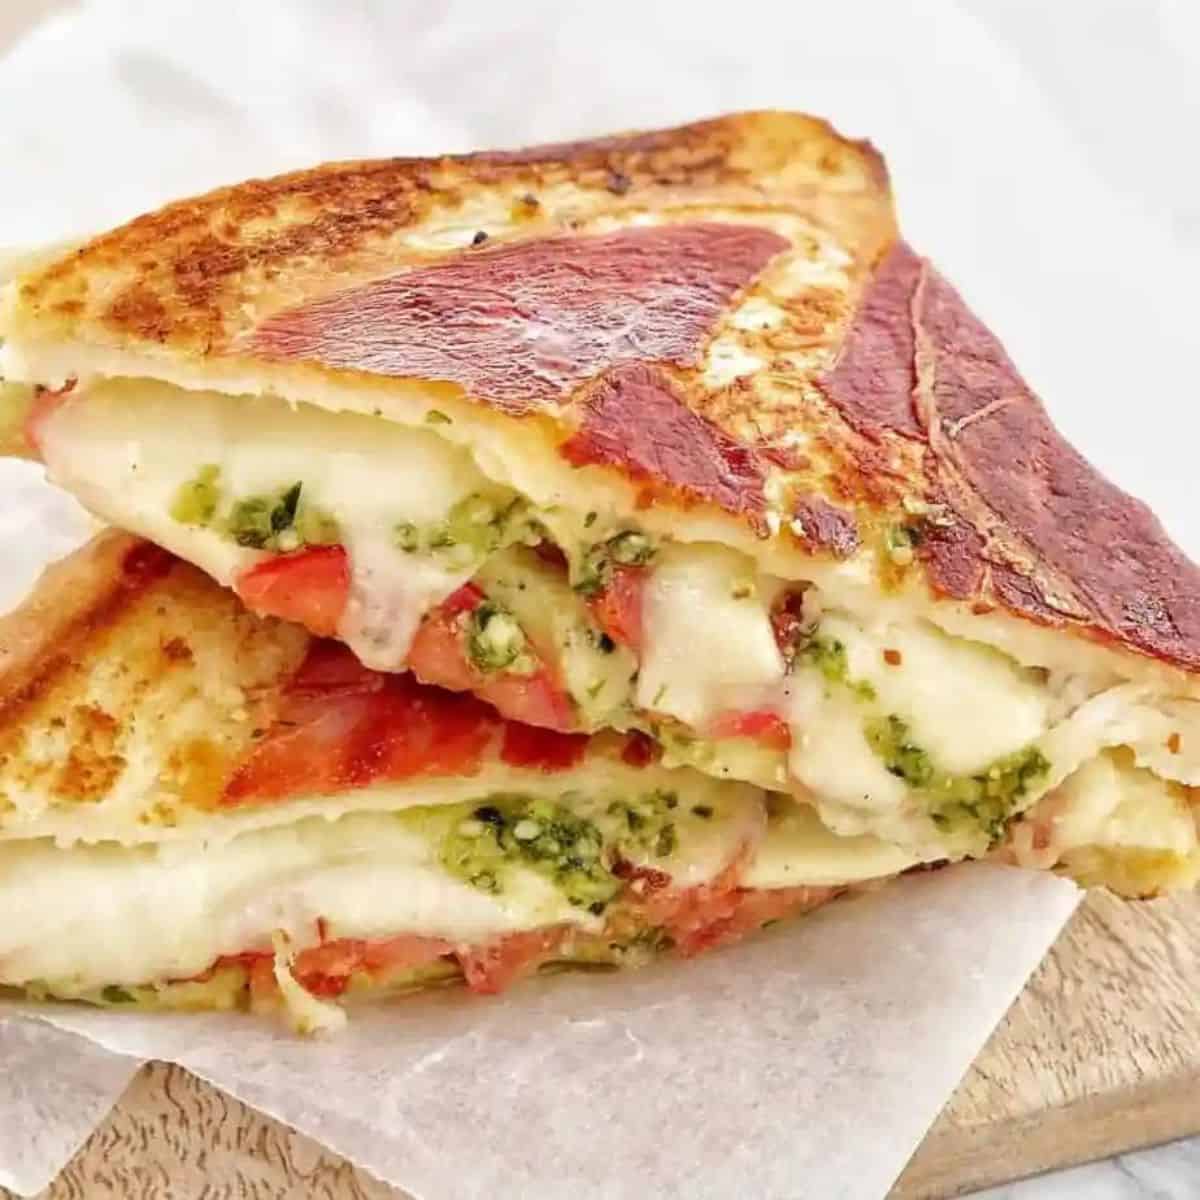 This Prosciutto Grilled Cheese Sandwich.